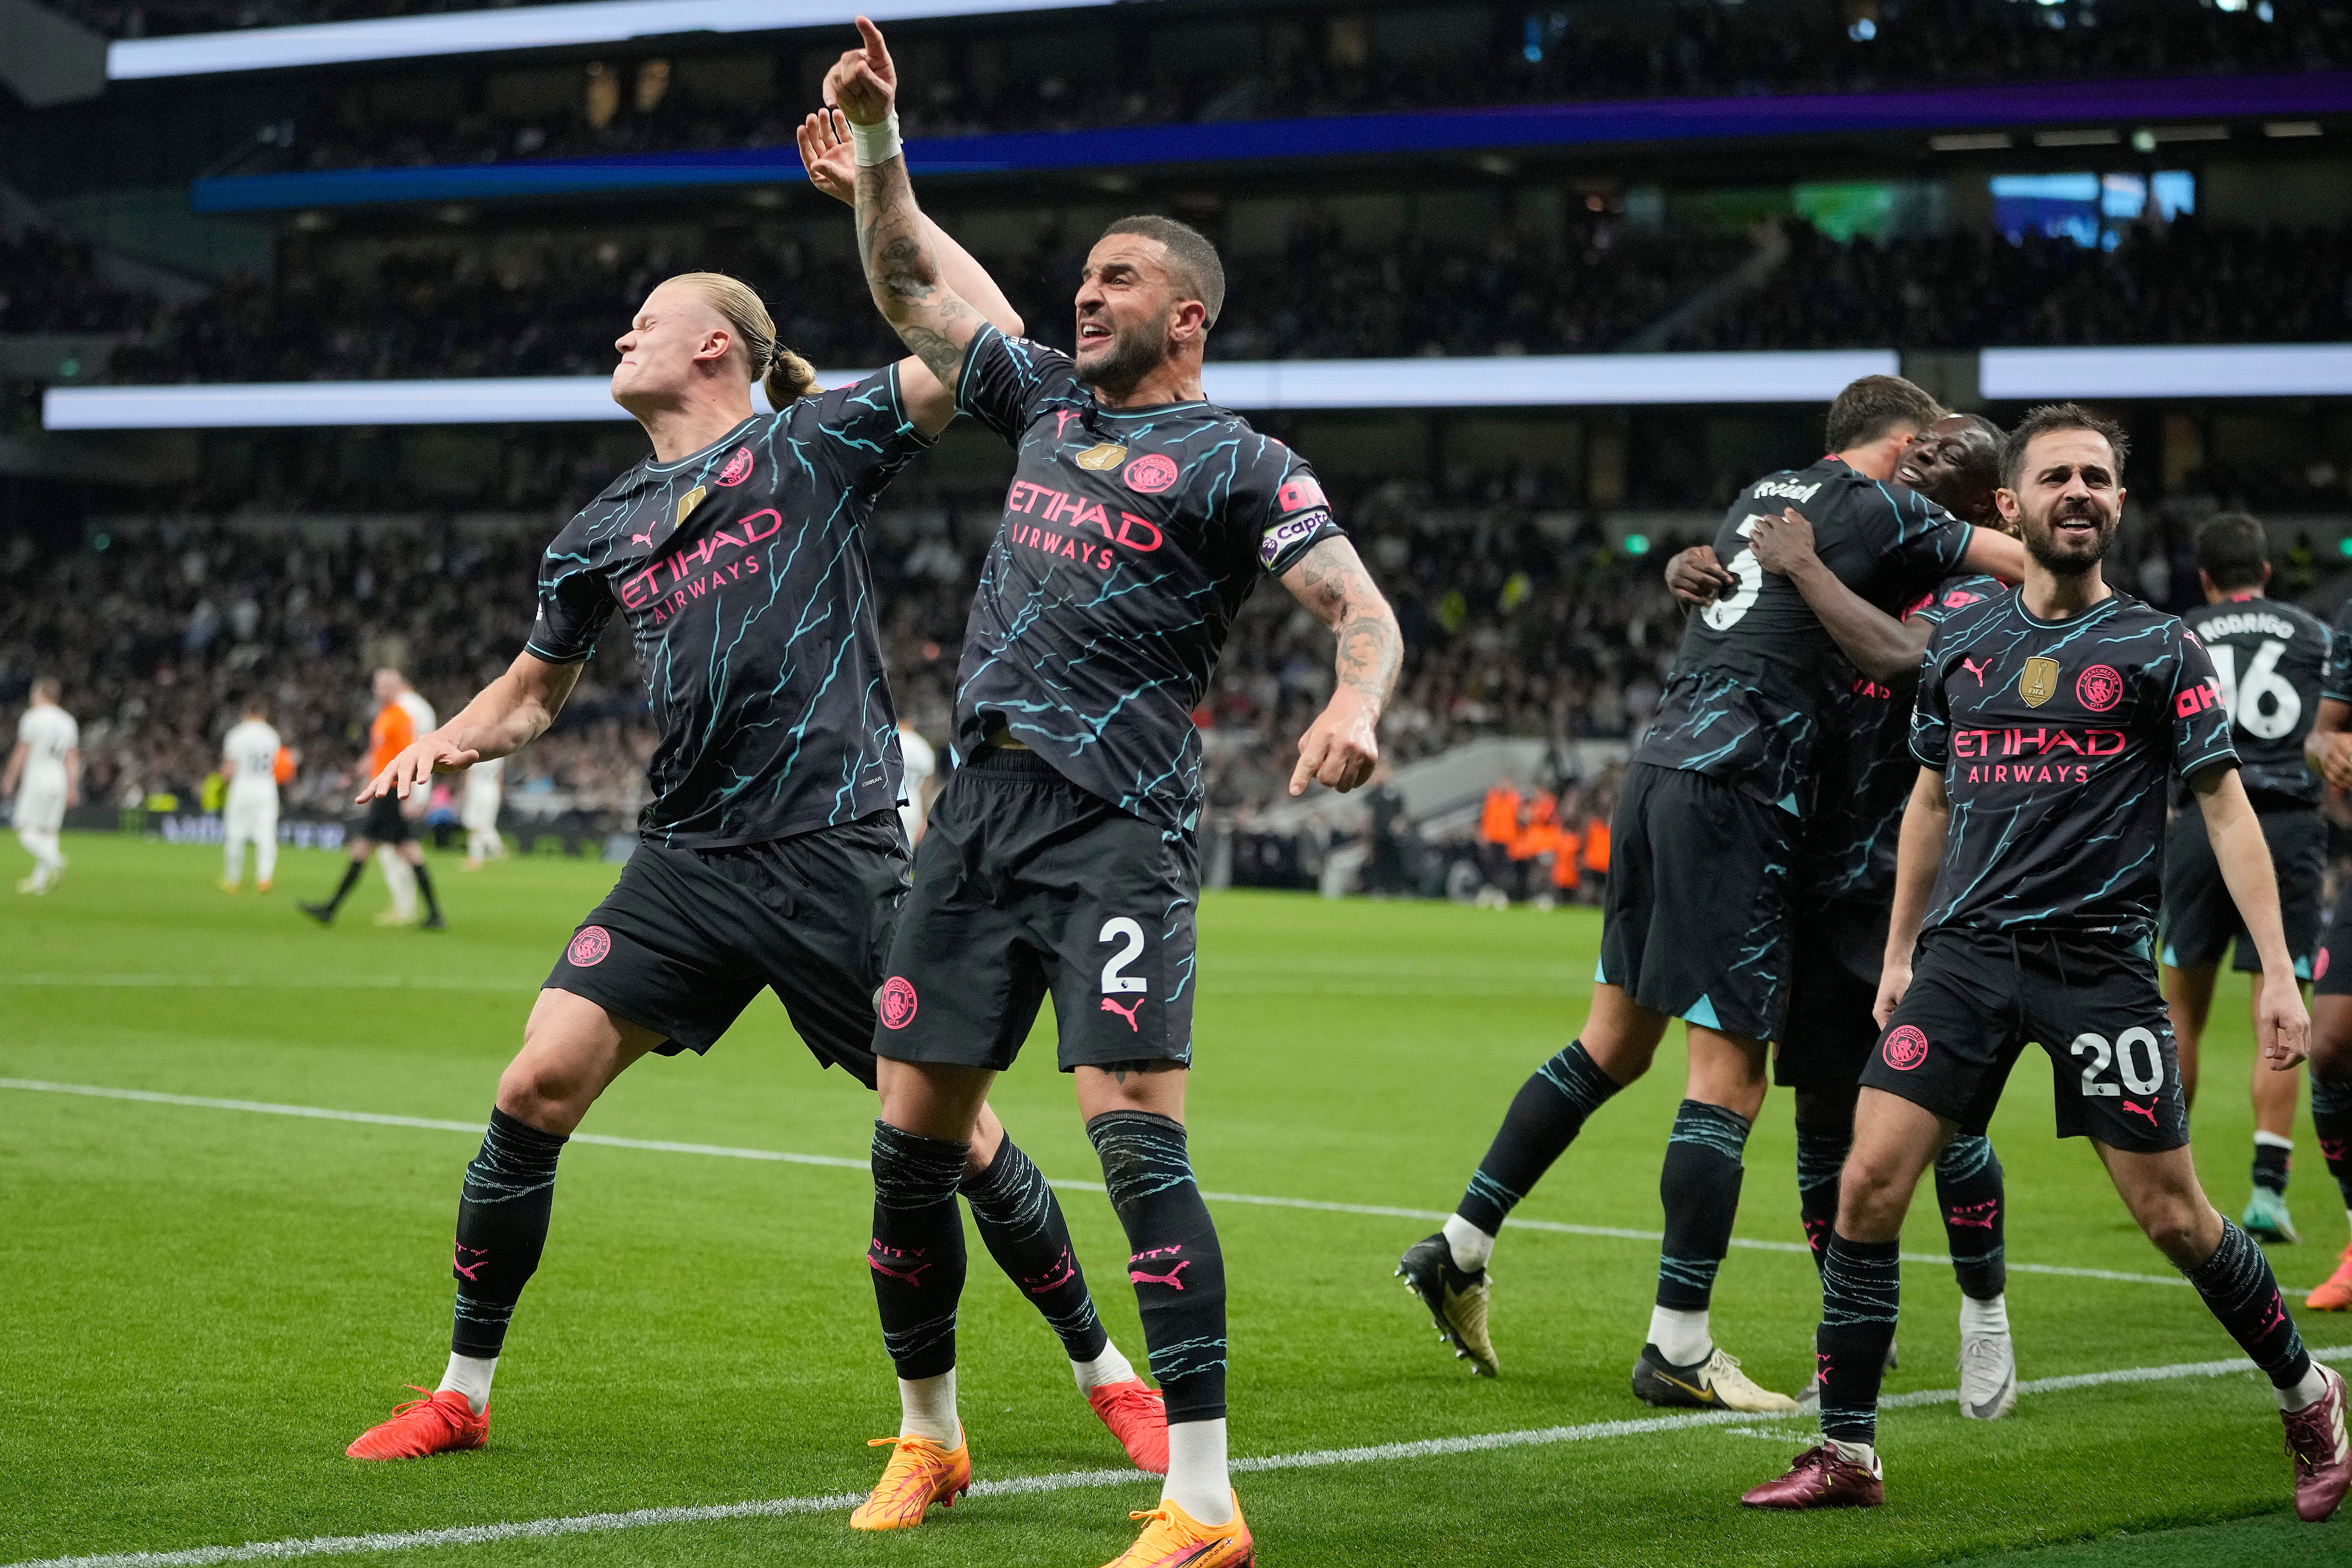 Manchester City continued their seemingly inevitable charge to become champions with a win against Tottenham in the week